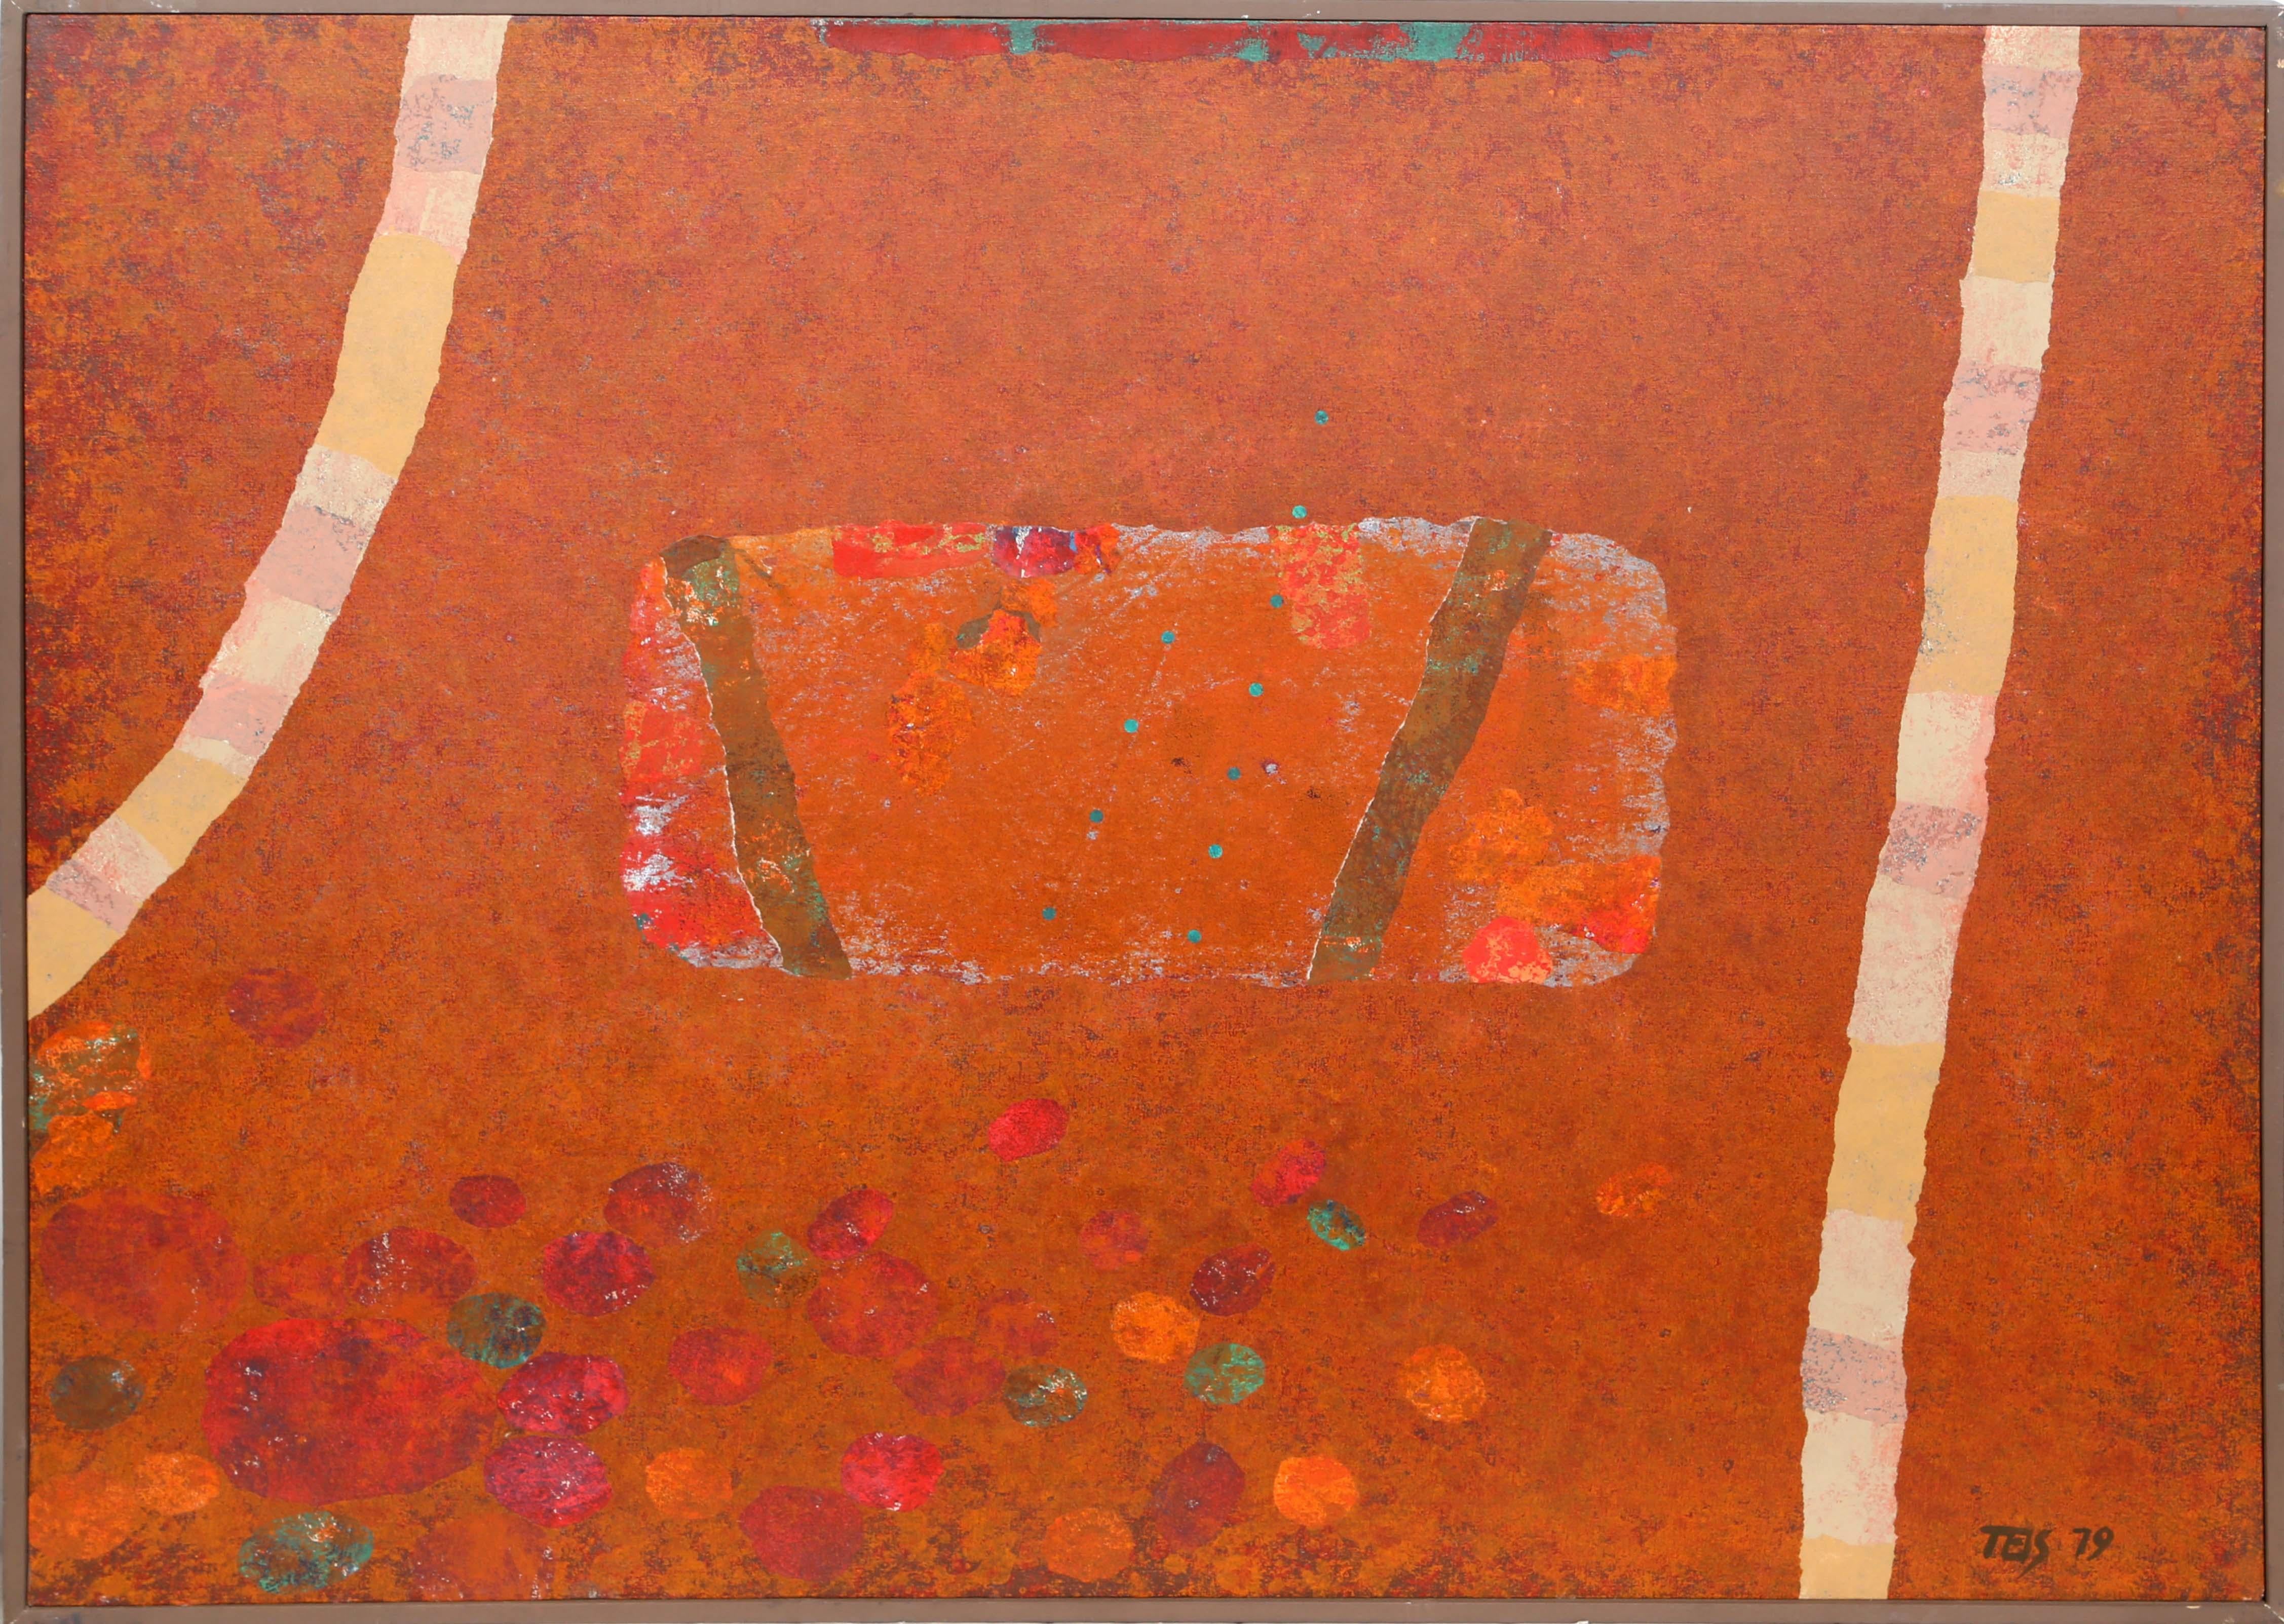 Artist: Dan Teis, American (1925 - 2002)
Title: Orange Abstract
Year: 1979
Medium: Acrylic and Collage on Canvas, signed and dated l.r.
Size: 36 in. x 48 in. (91.44 cm x 121.92 cm)
Frame Size: 37 x 49 inches